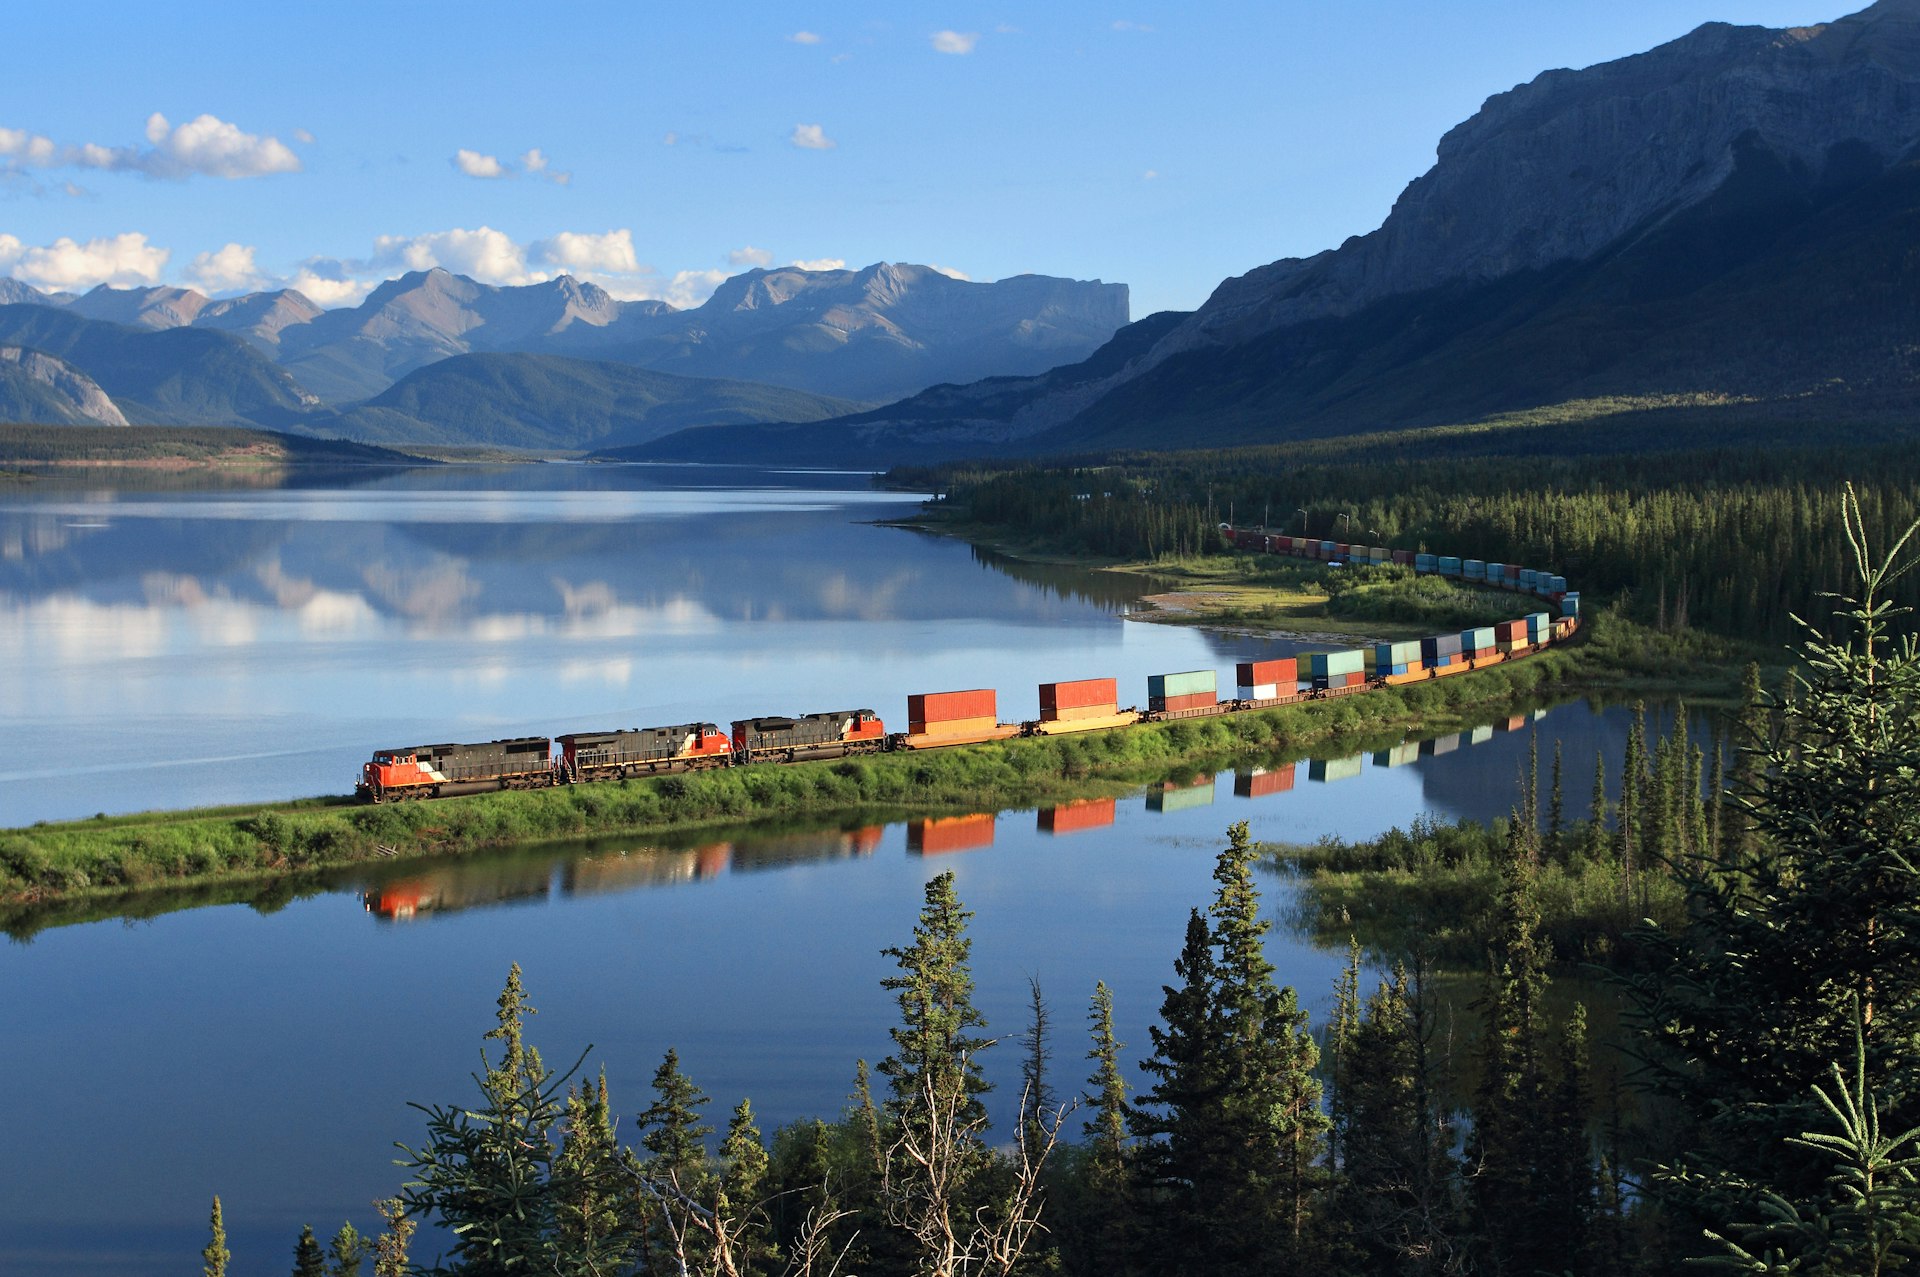 A long freight train follows the tracks through an incredibly scenic lakeside and mountain location